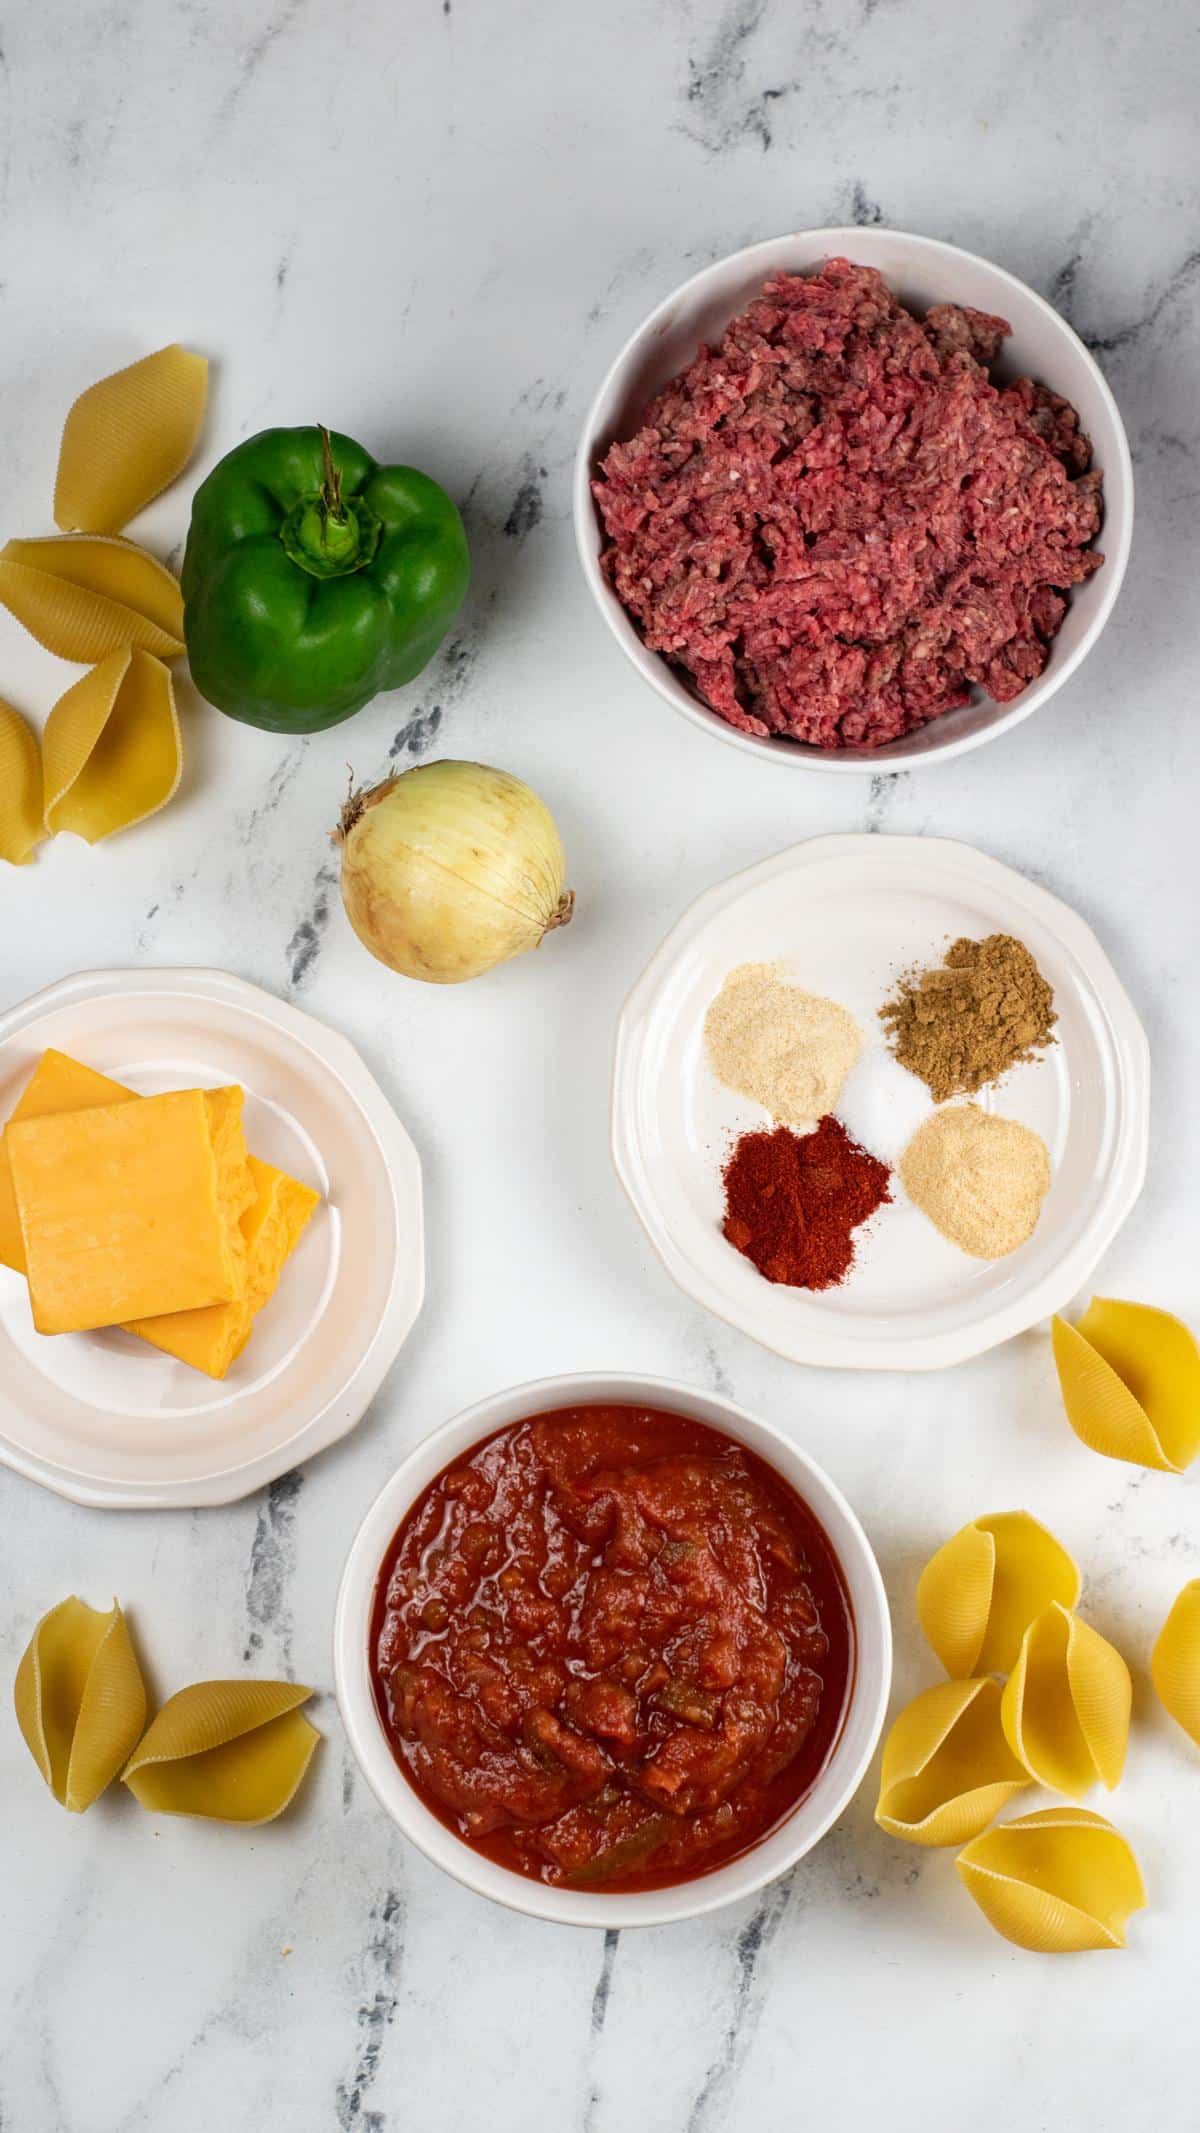 Ingredients for taco stuffed shells: raw ground beef, plate with spices, salsa, cheese, onion, green bell pepper and large shell pasta sprinkled around.